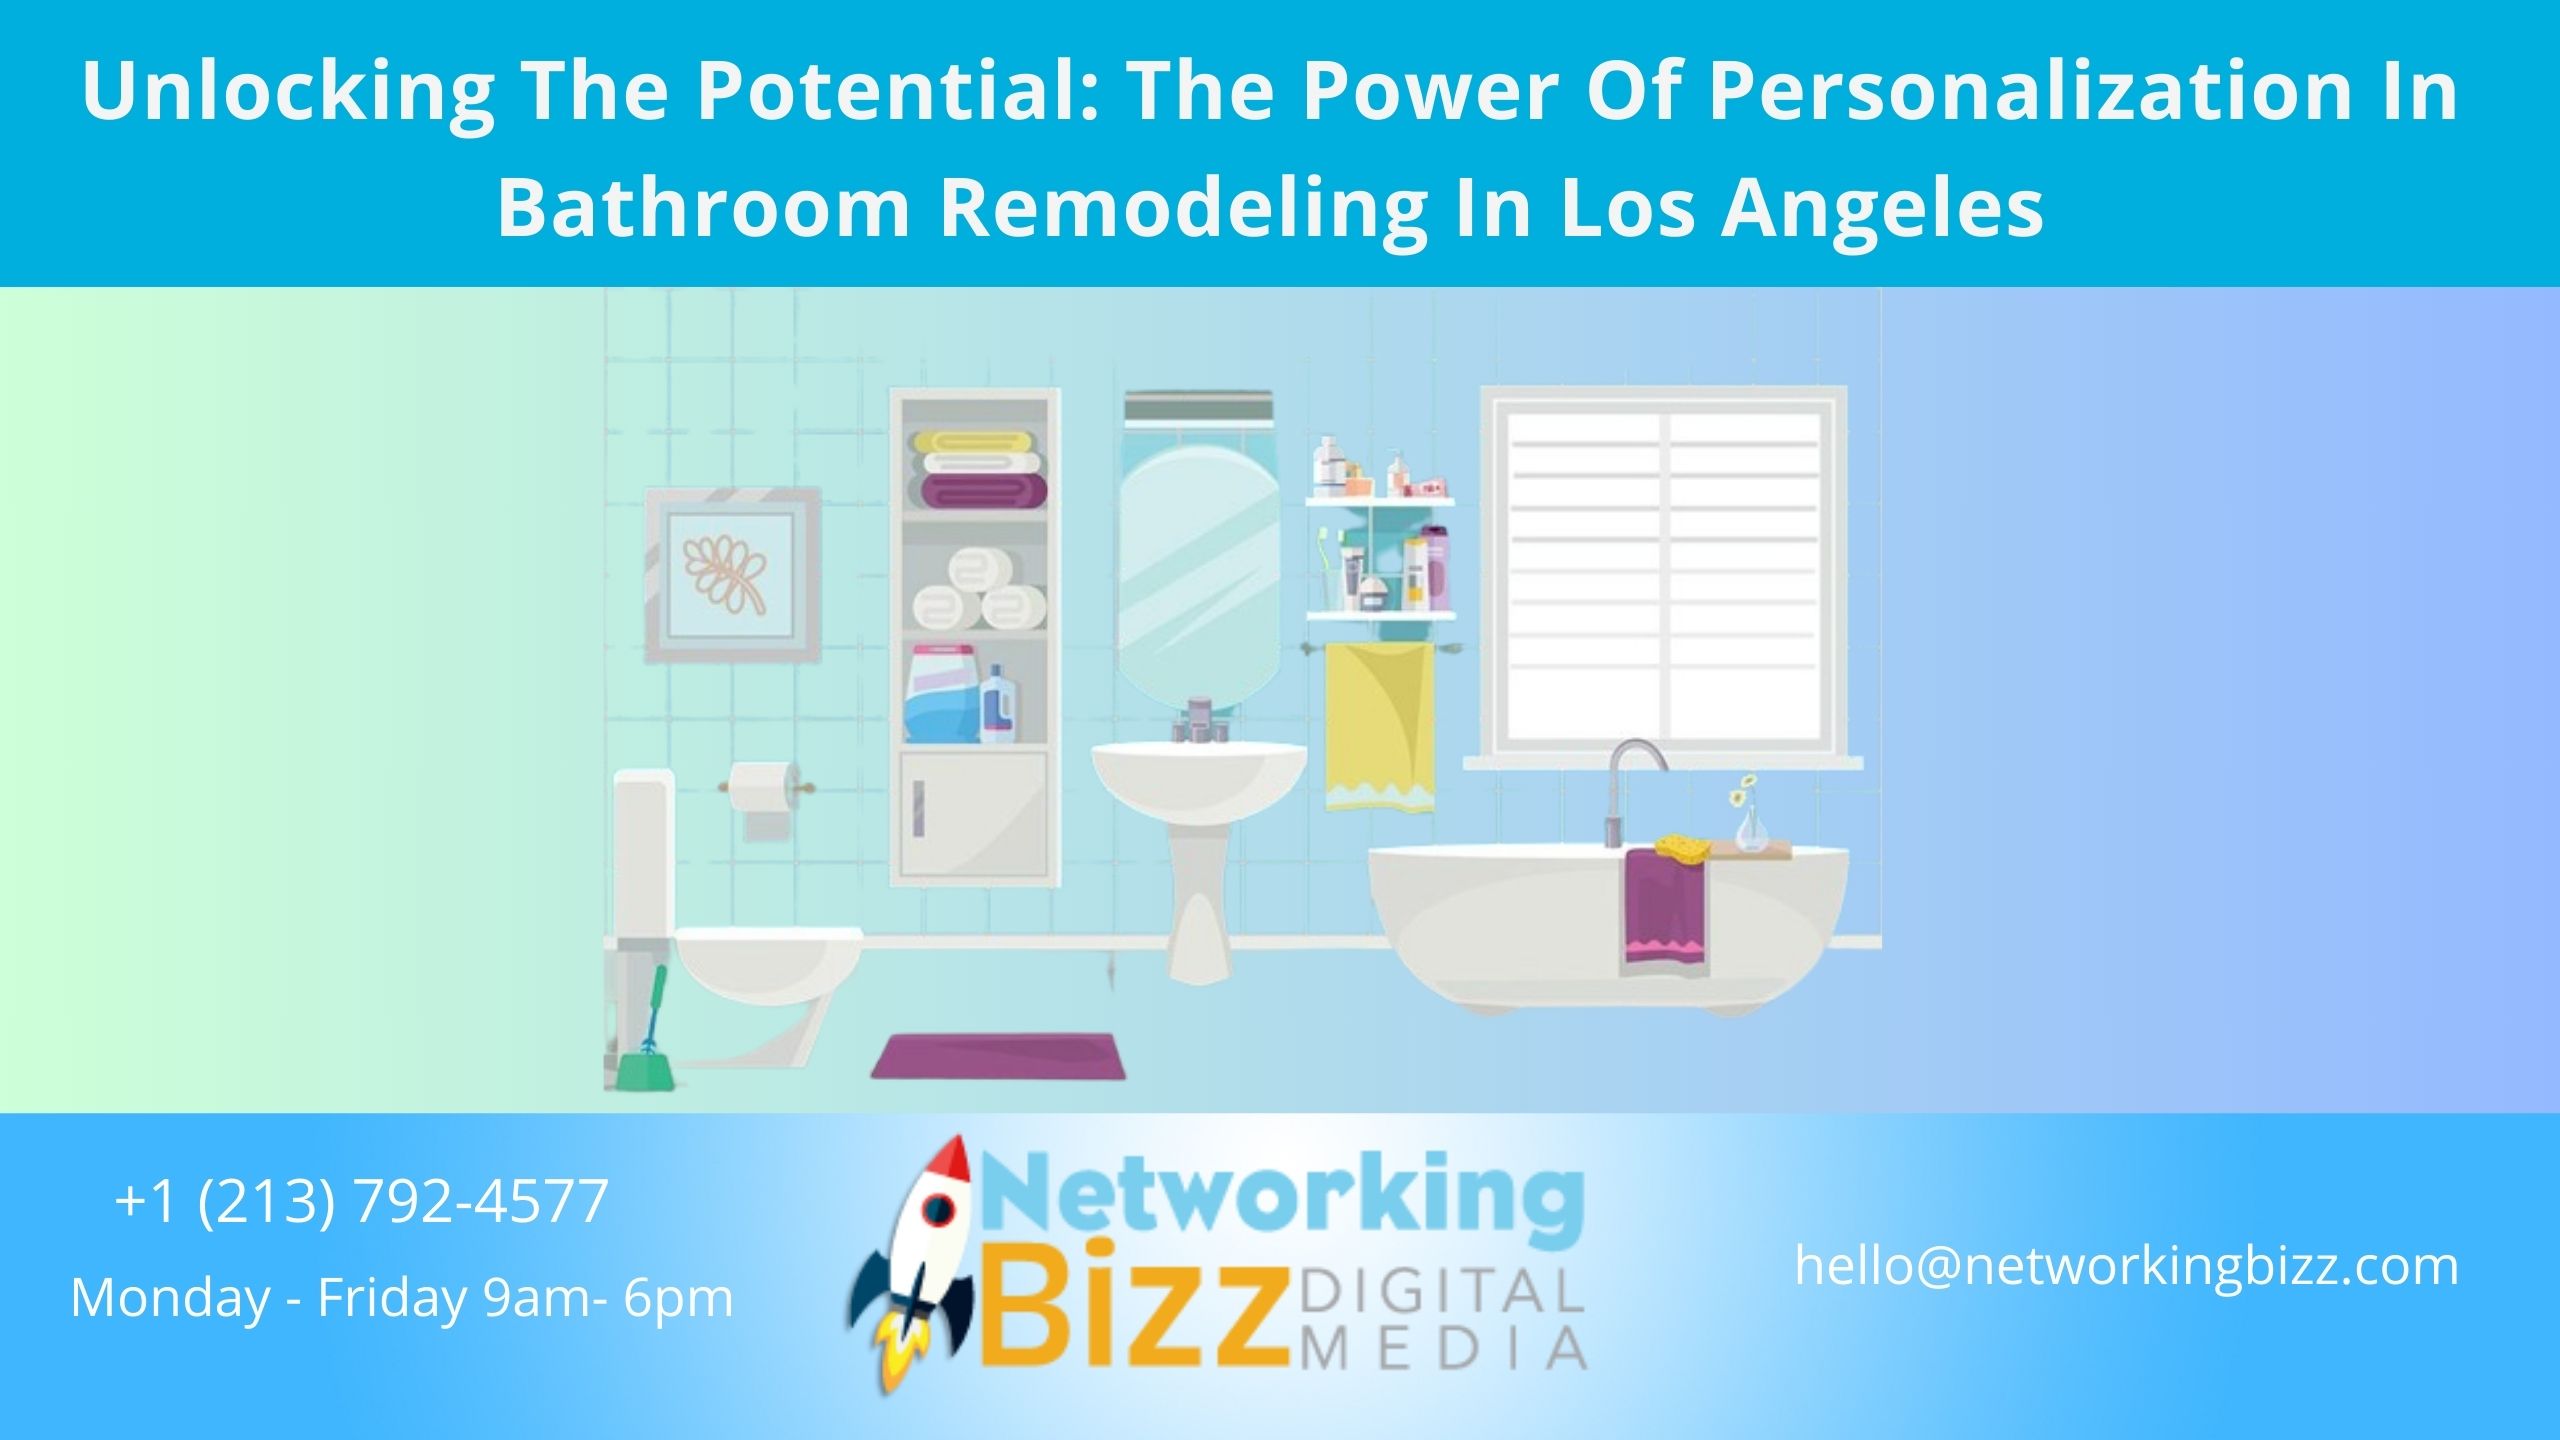 Unlocking The Potential: The Power Of Personalization In Bathroom Remodeling In Los Angeles